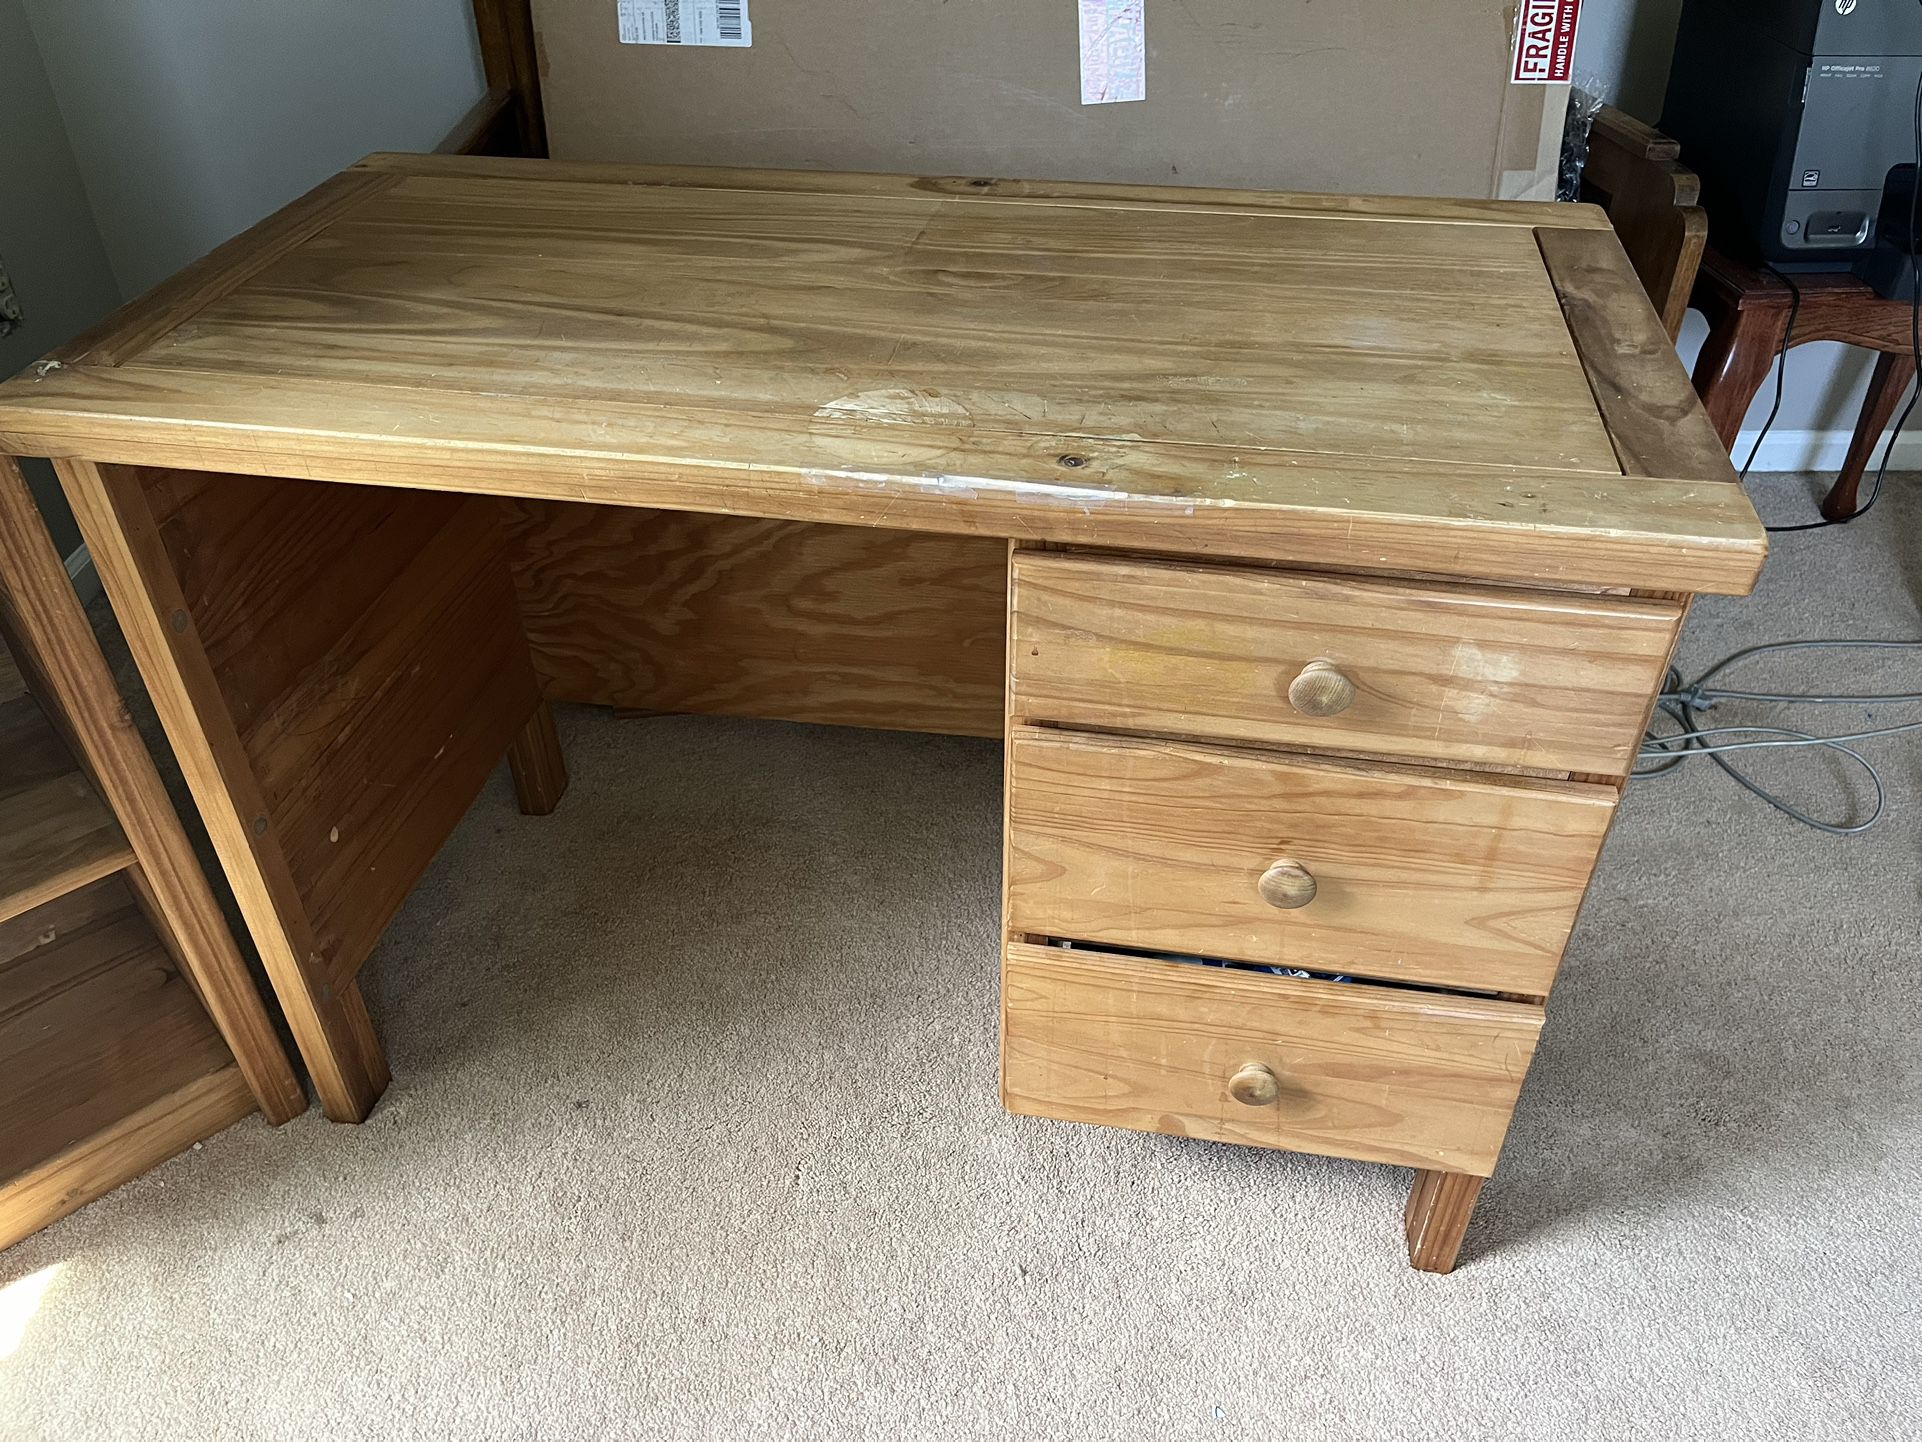 Kid’s Three Drawer Desk. Very Sturdy Wood. Paint Or Stain